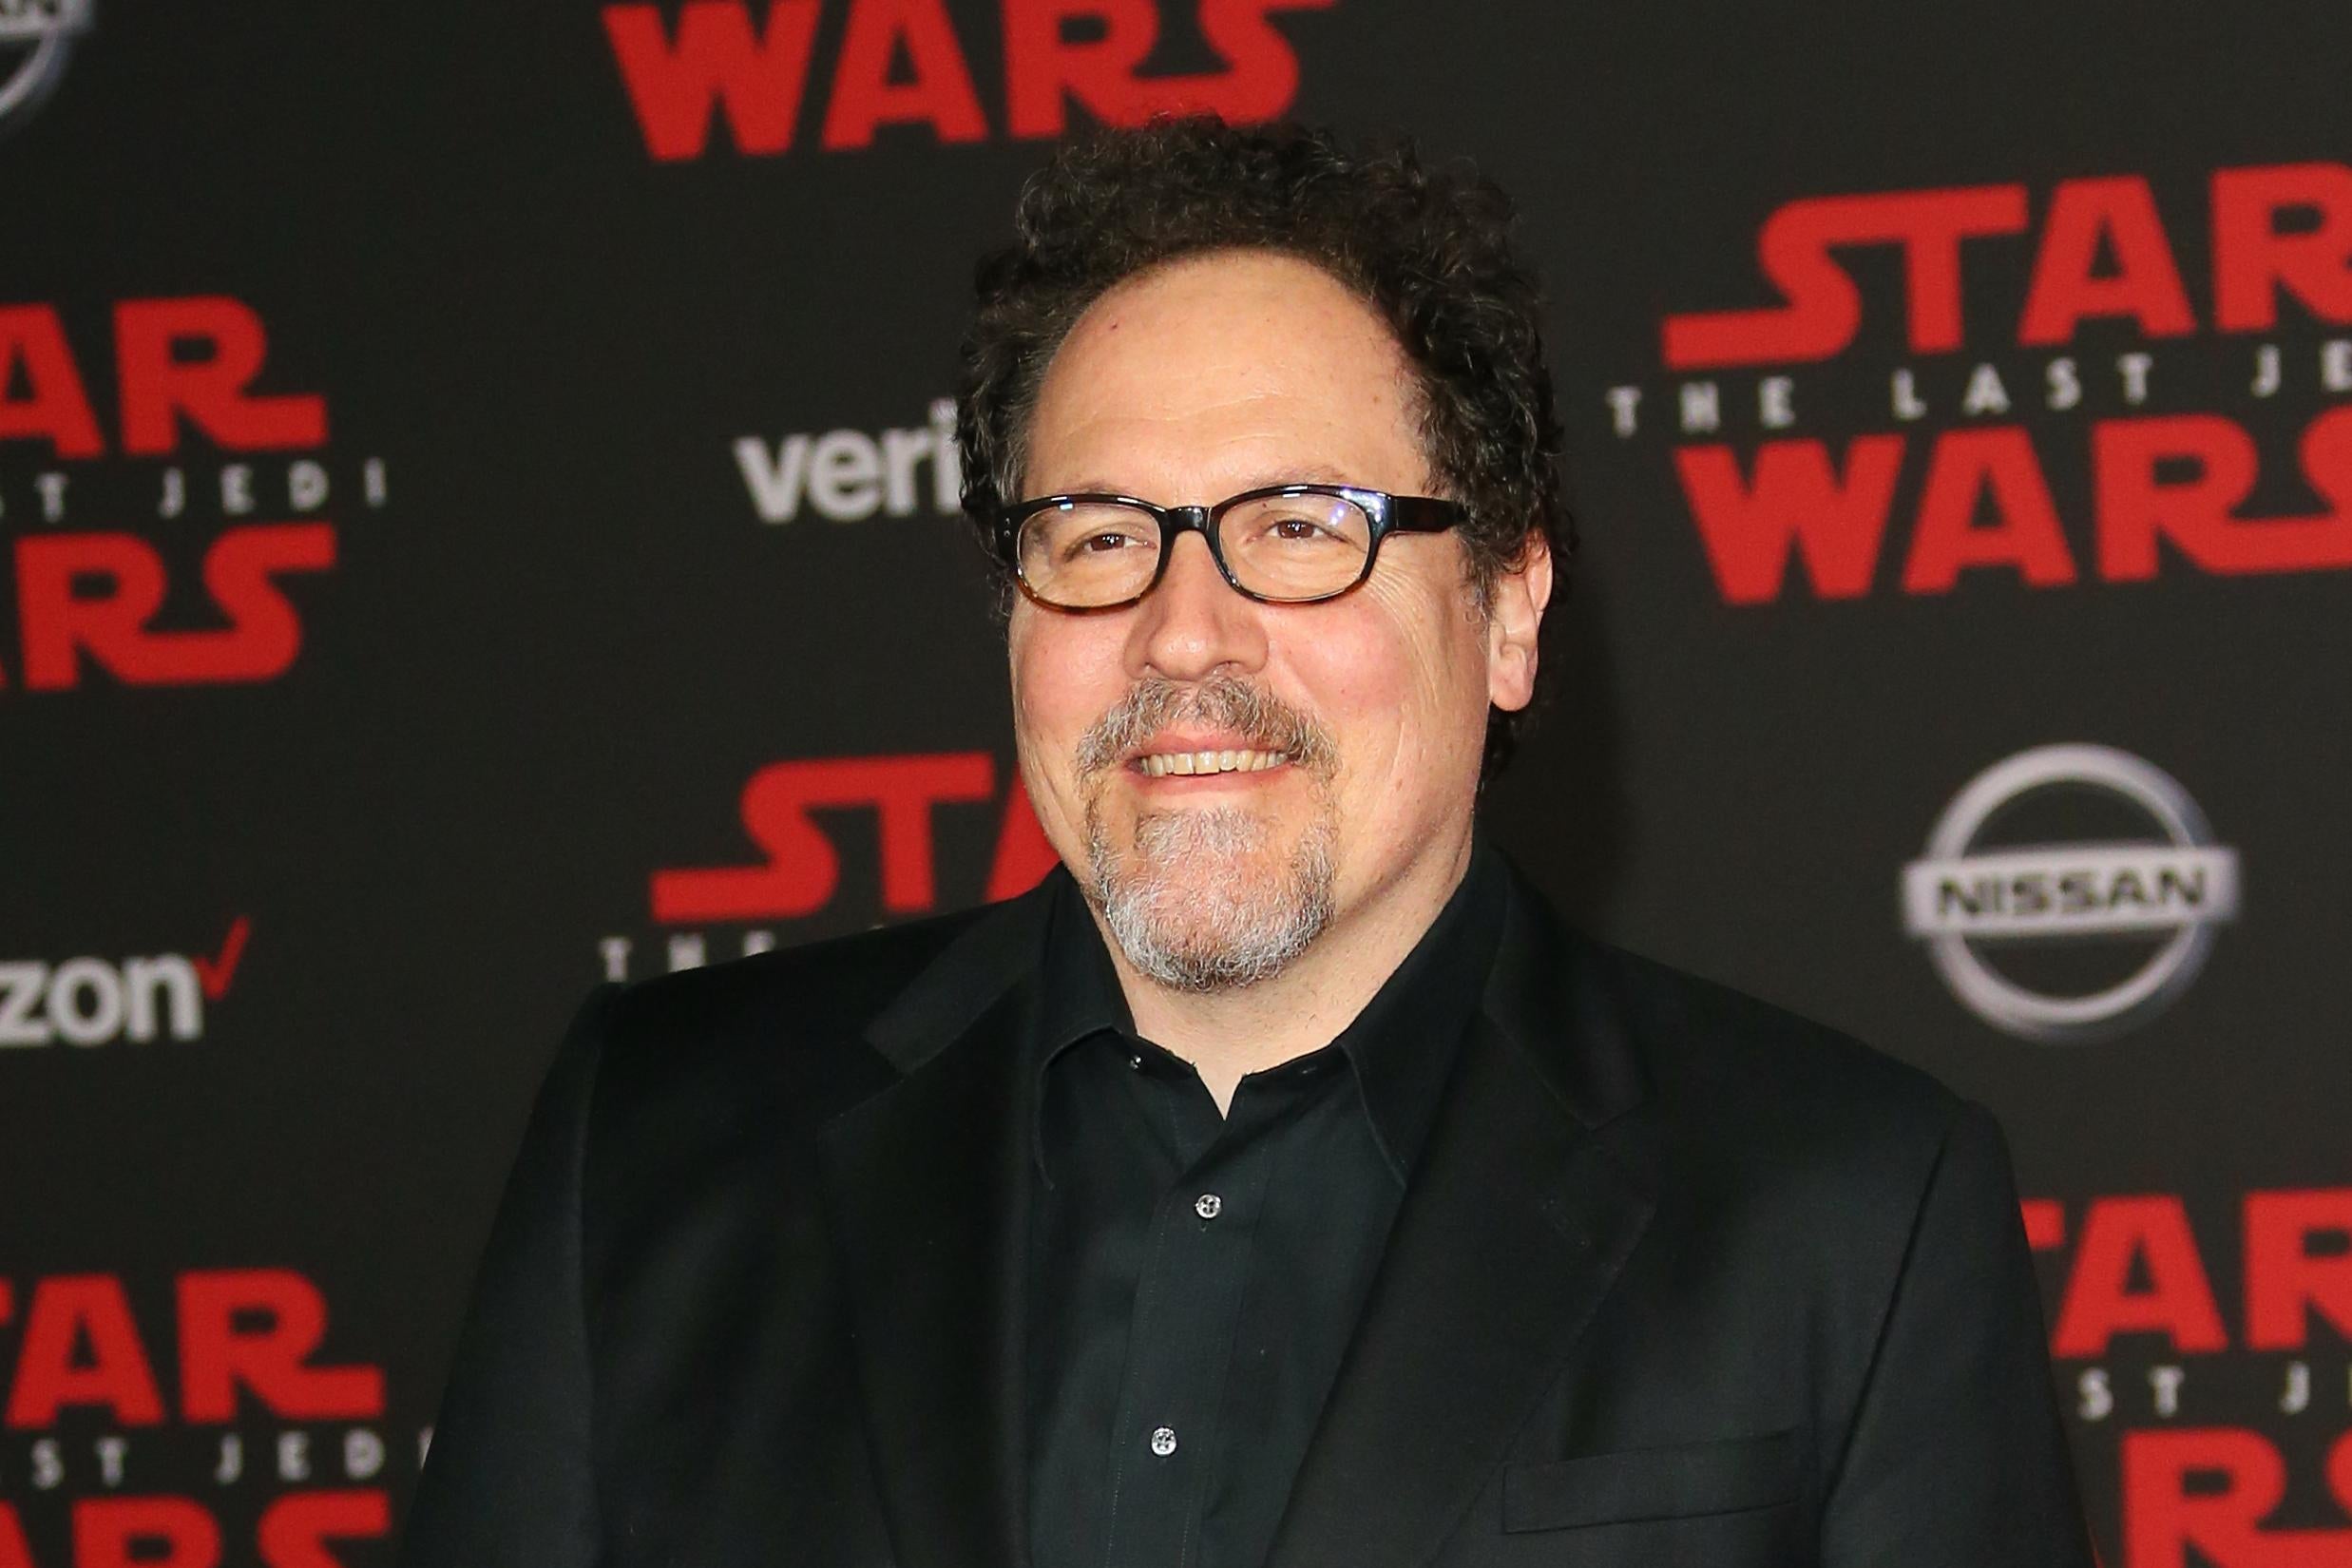 Actor Jon Favreau arrives for the premiere of Disney Pictures and Lucasfilm's 'Star Wars: The Last Jedi' at The Shrine Auditorium, in Los Angeles on December 9, 2017. / AFP PHOTO / JEAN-BAPTISTE LACROIX        (Photo credit should read JEAN-BAPTISTE LACROIX/AFP/Getty Images)